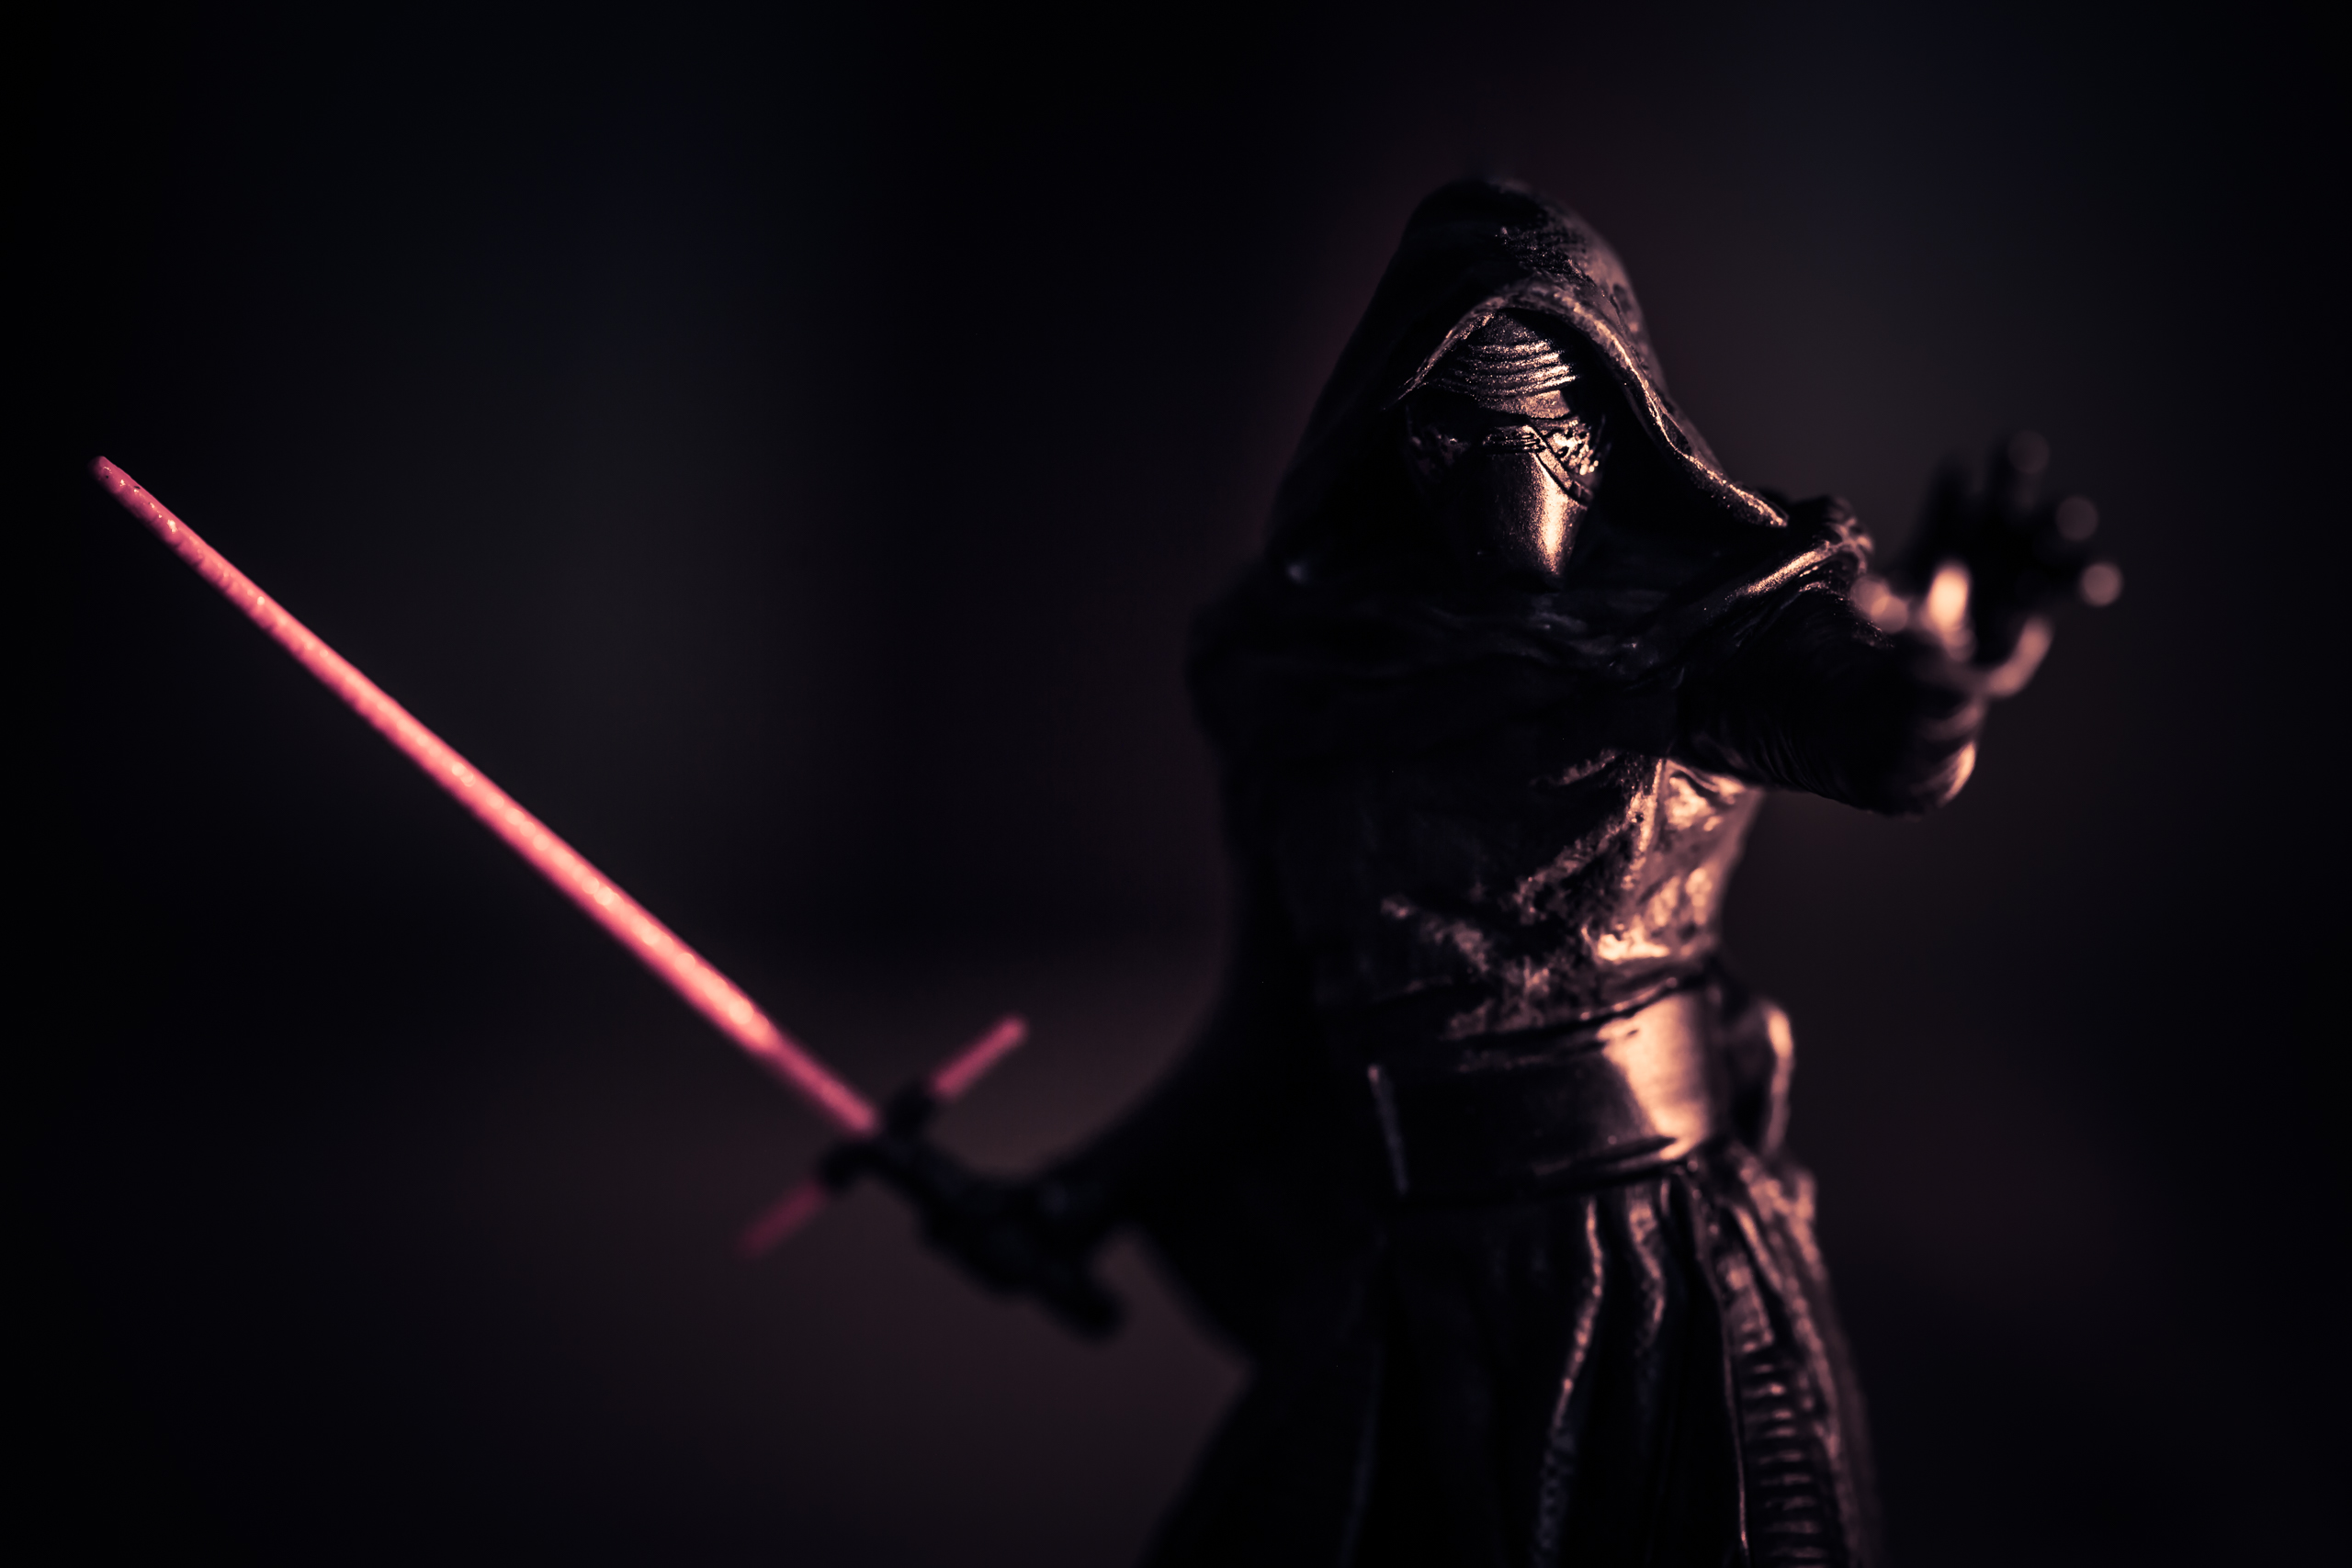 Kylo Ren and The Dark Side of the Force